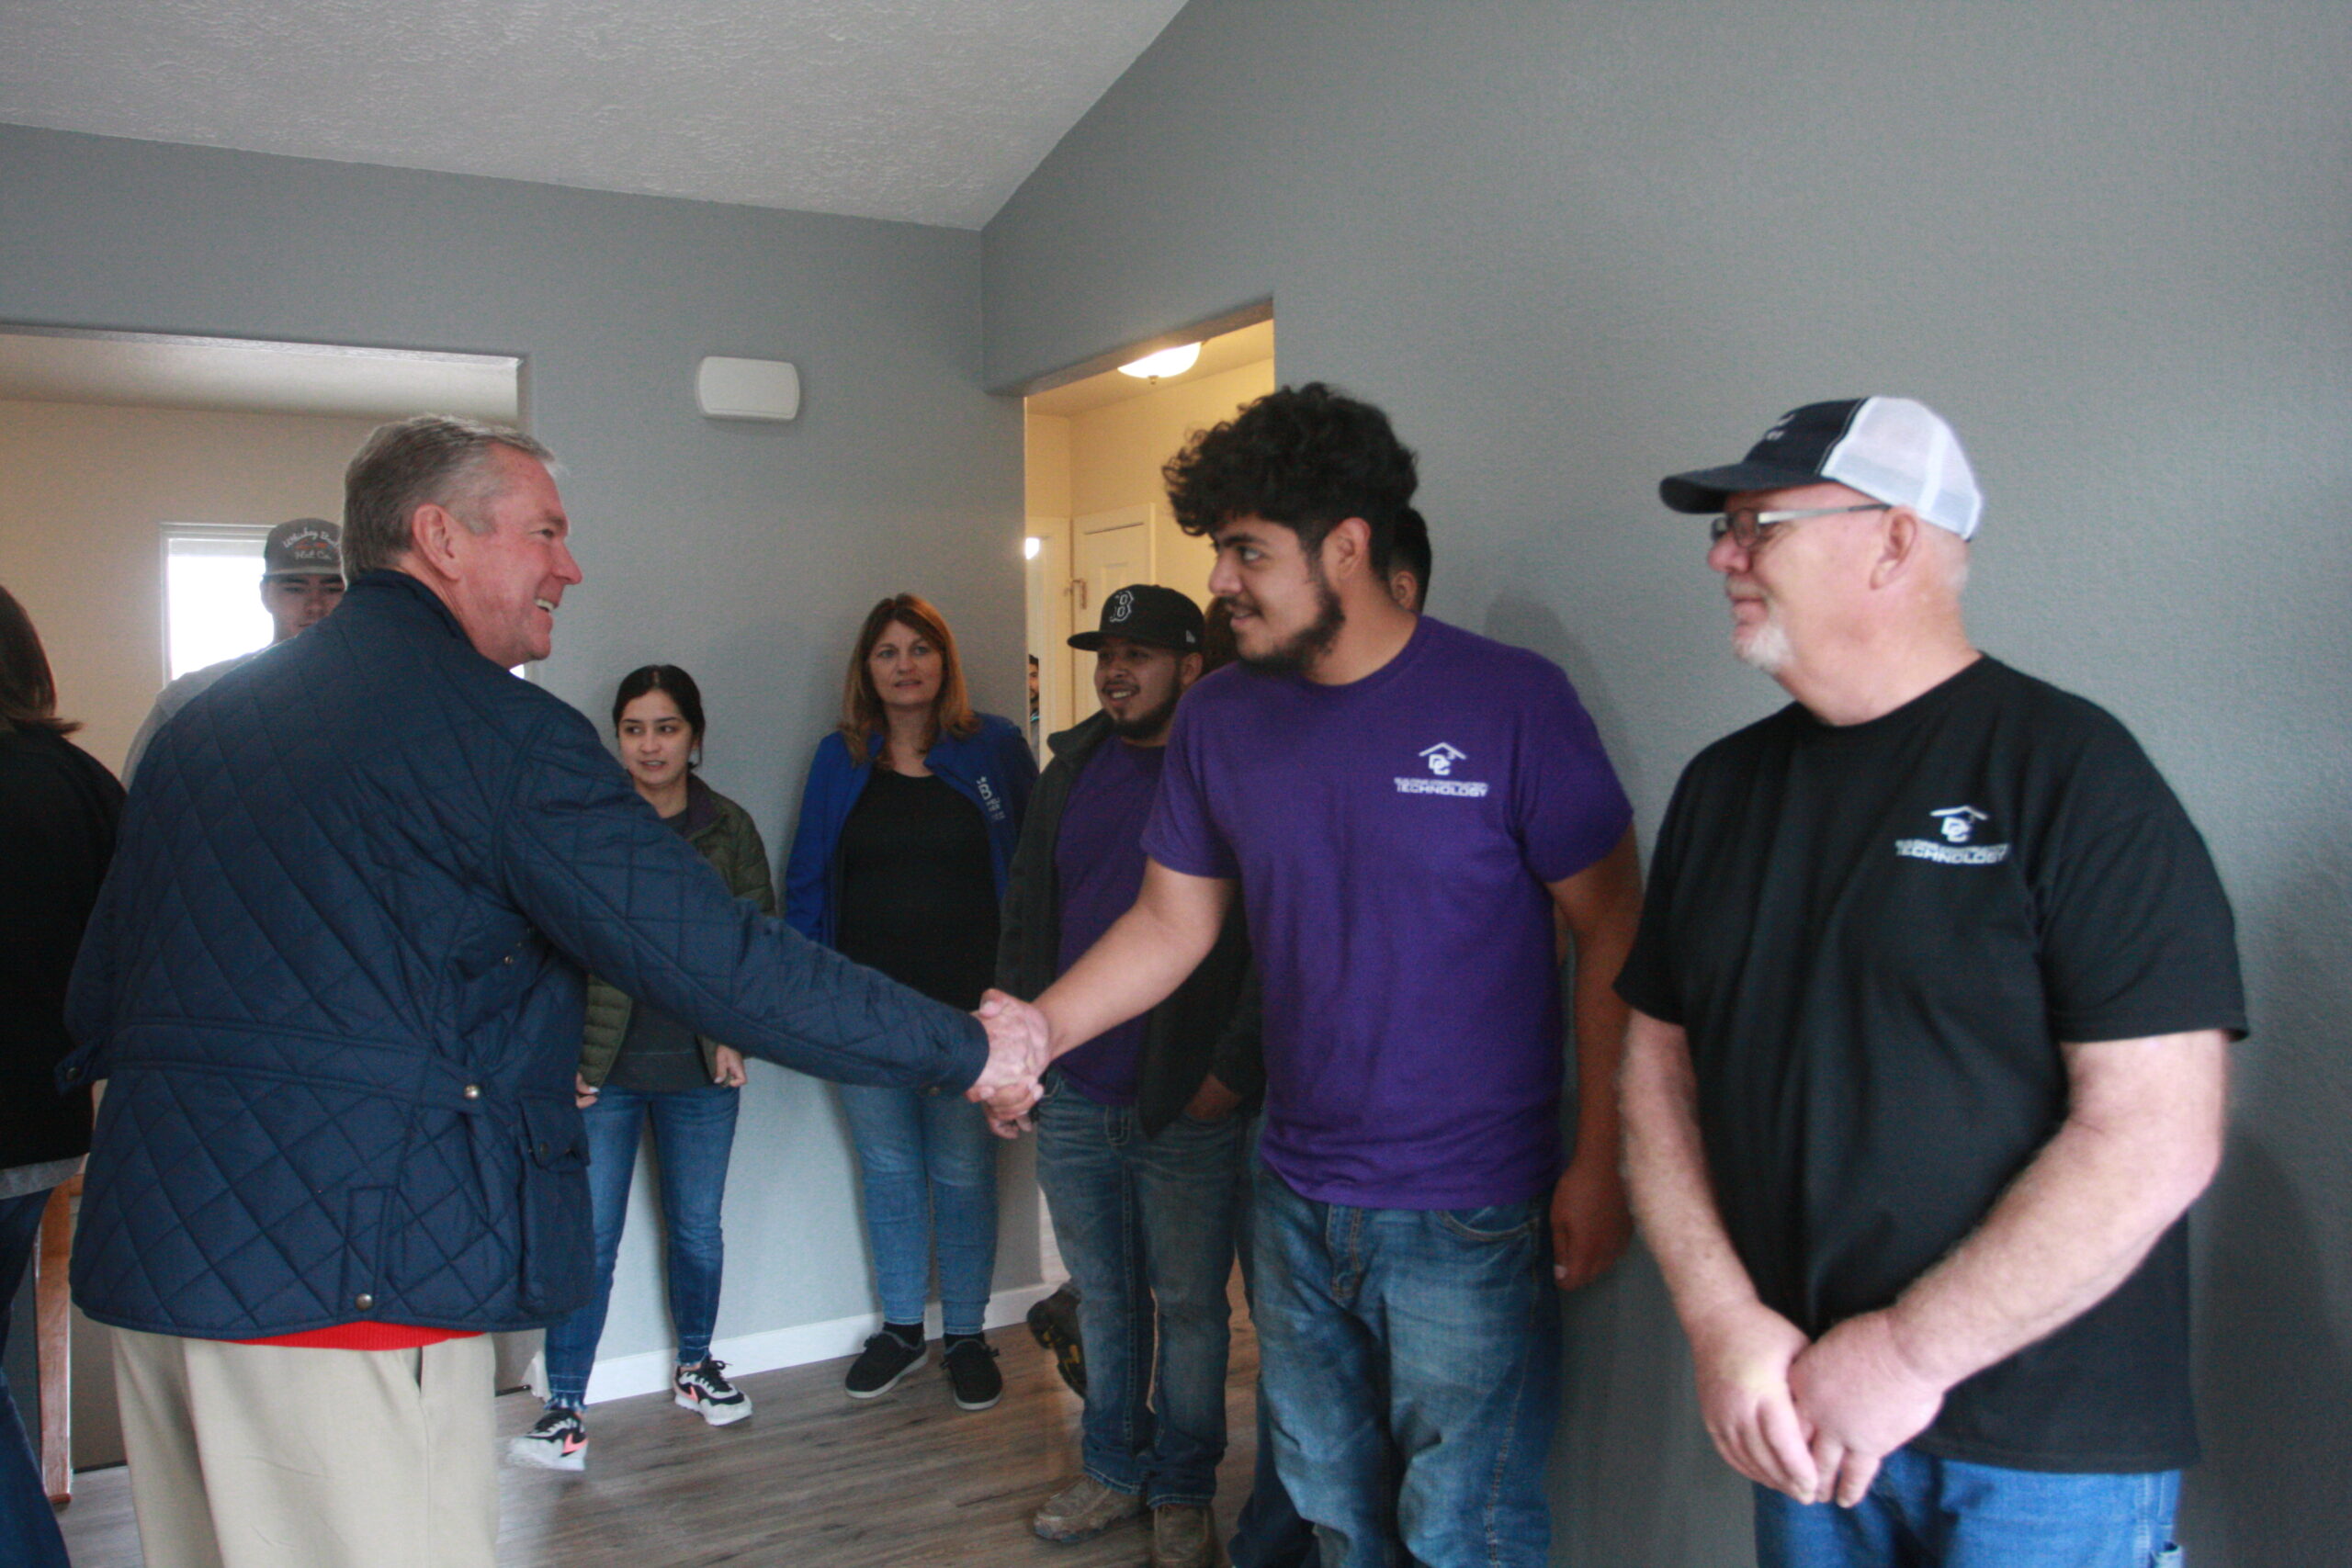 Dr. Harold Nolte, DC3 President shakes hands with BCT Students